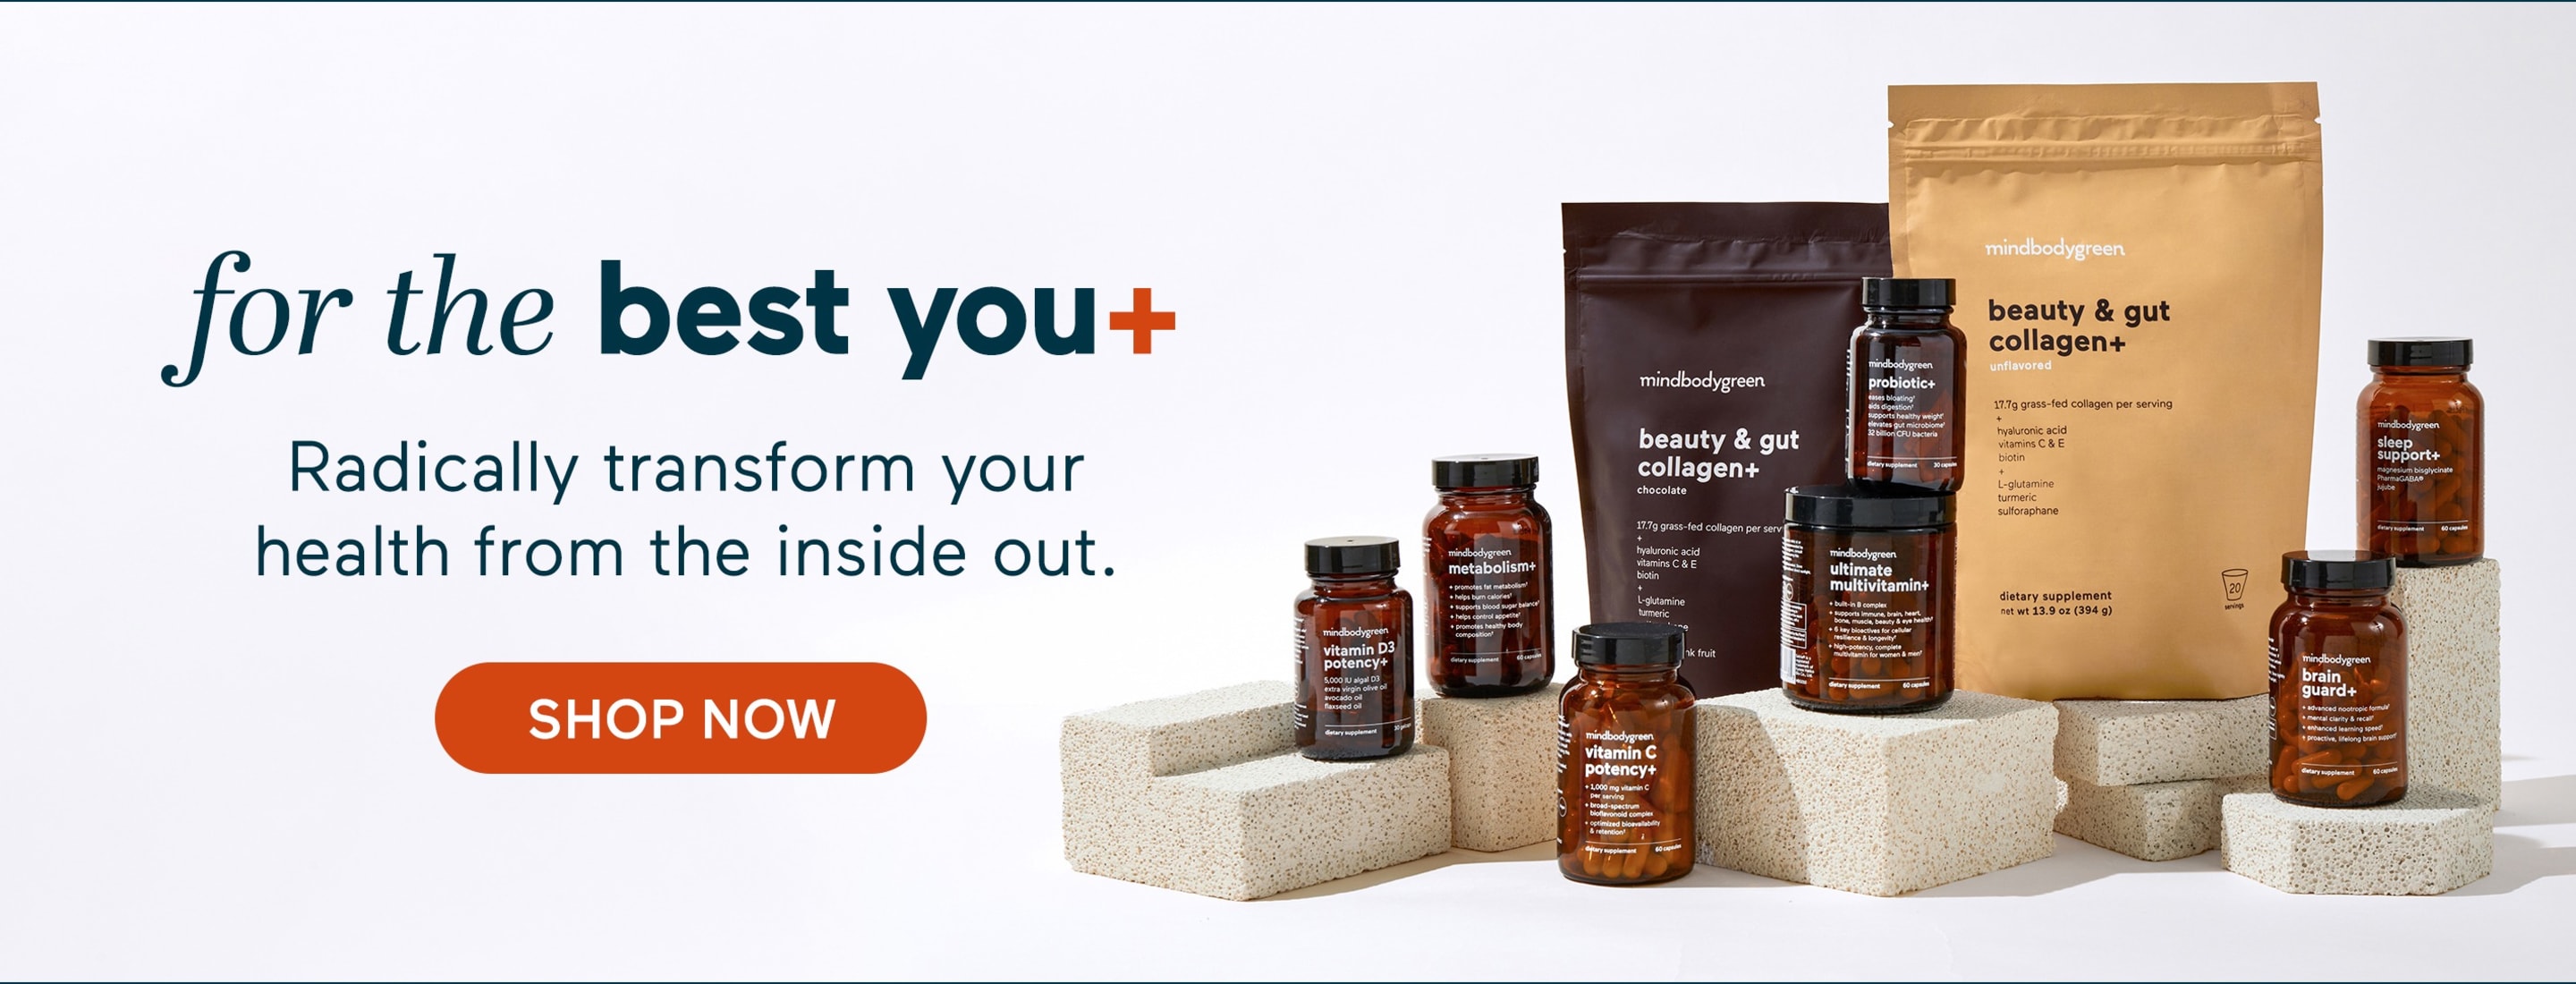 for the best you, radically transform your health from the inside out.